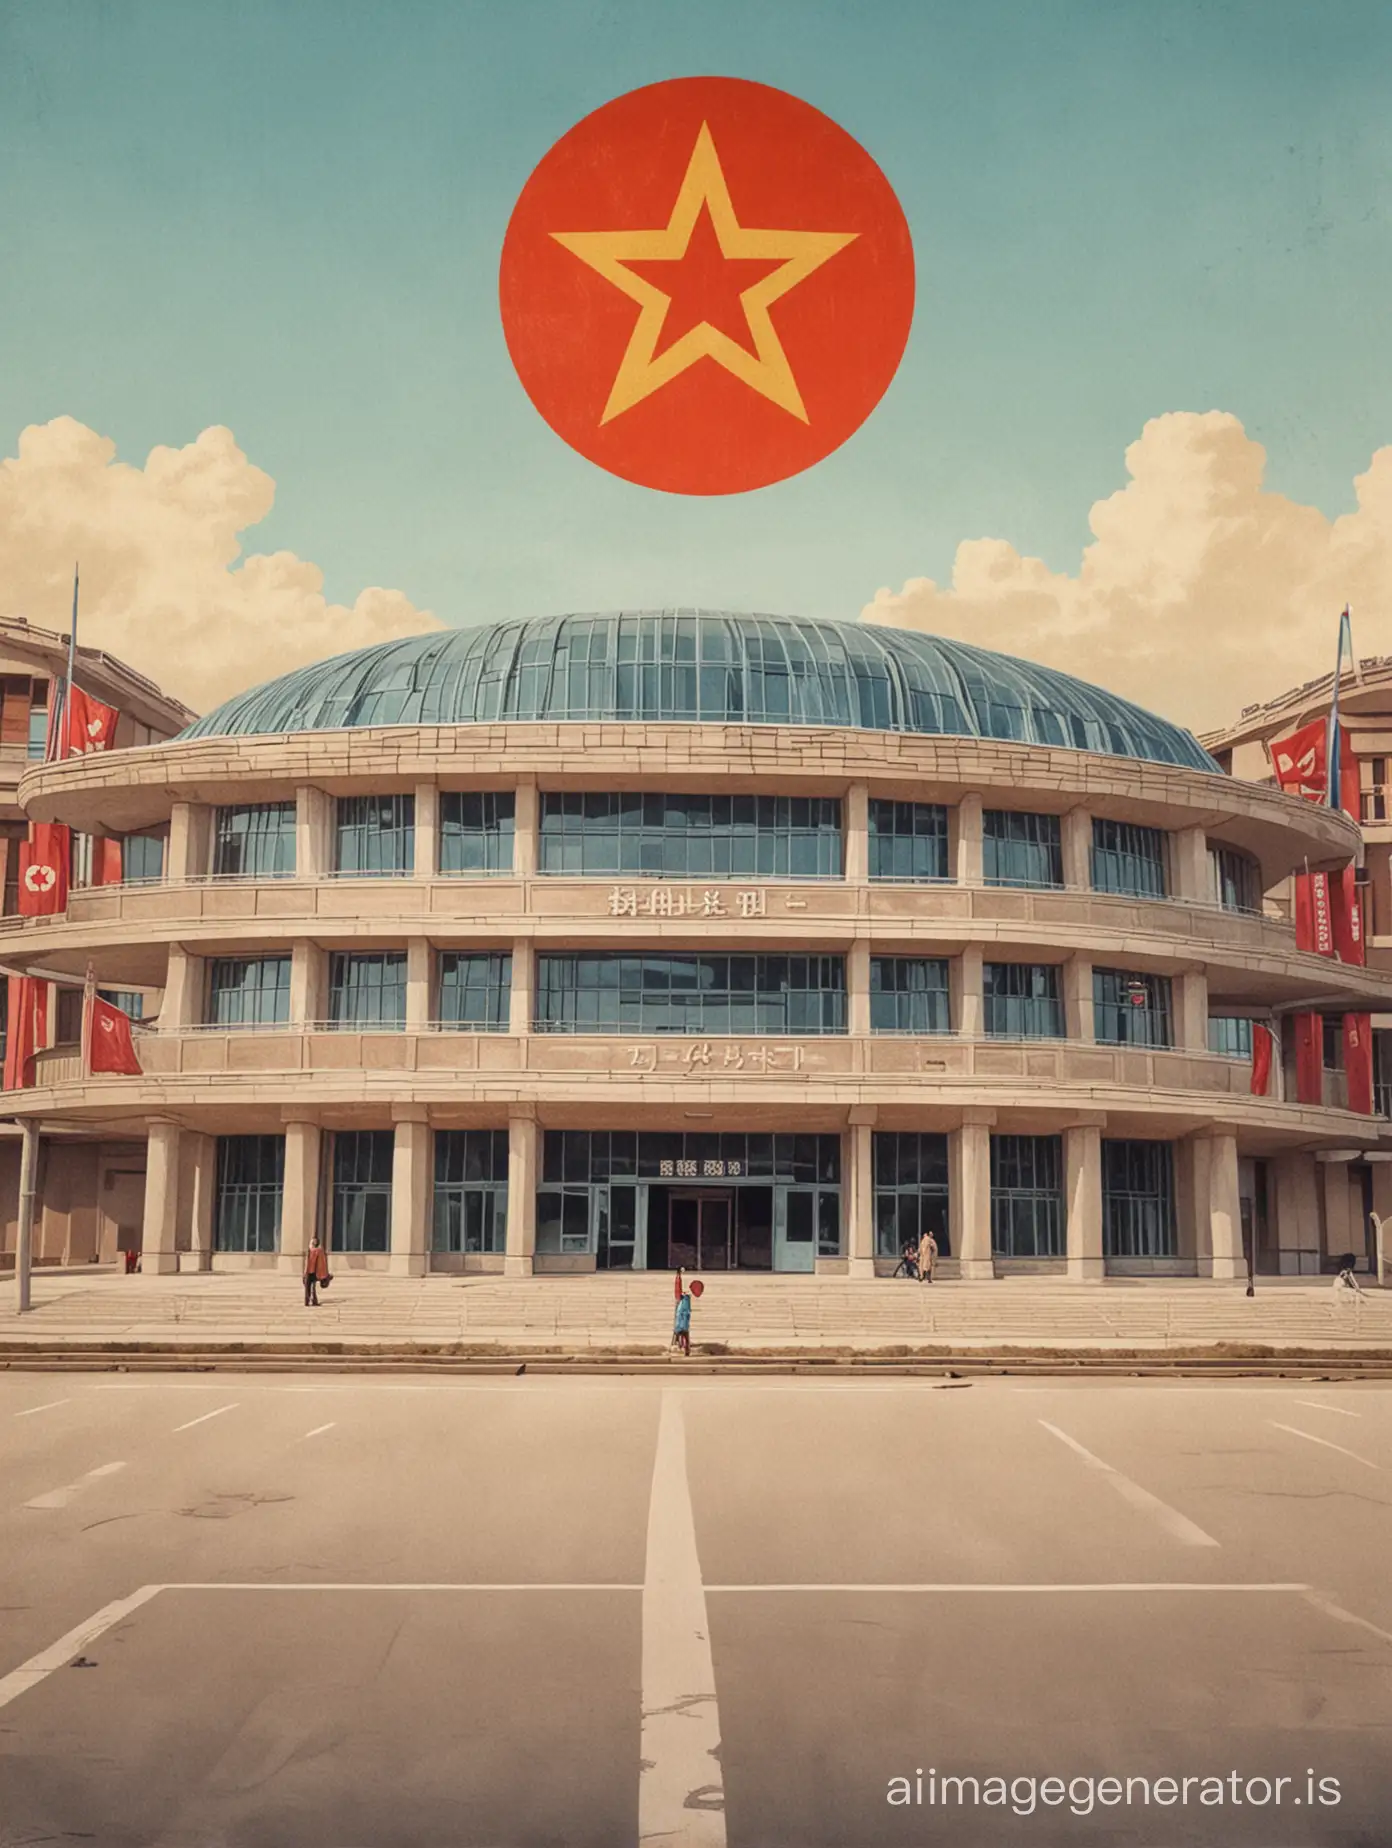 a gym fitness centre building in North Korea in communist poster artwork style